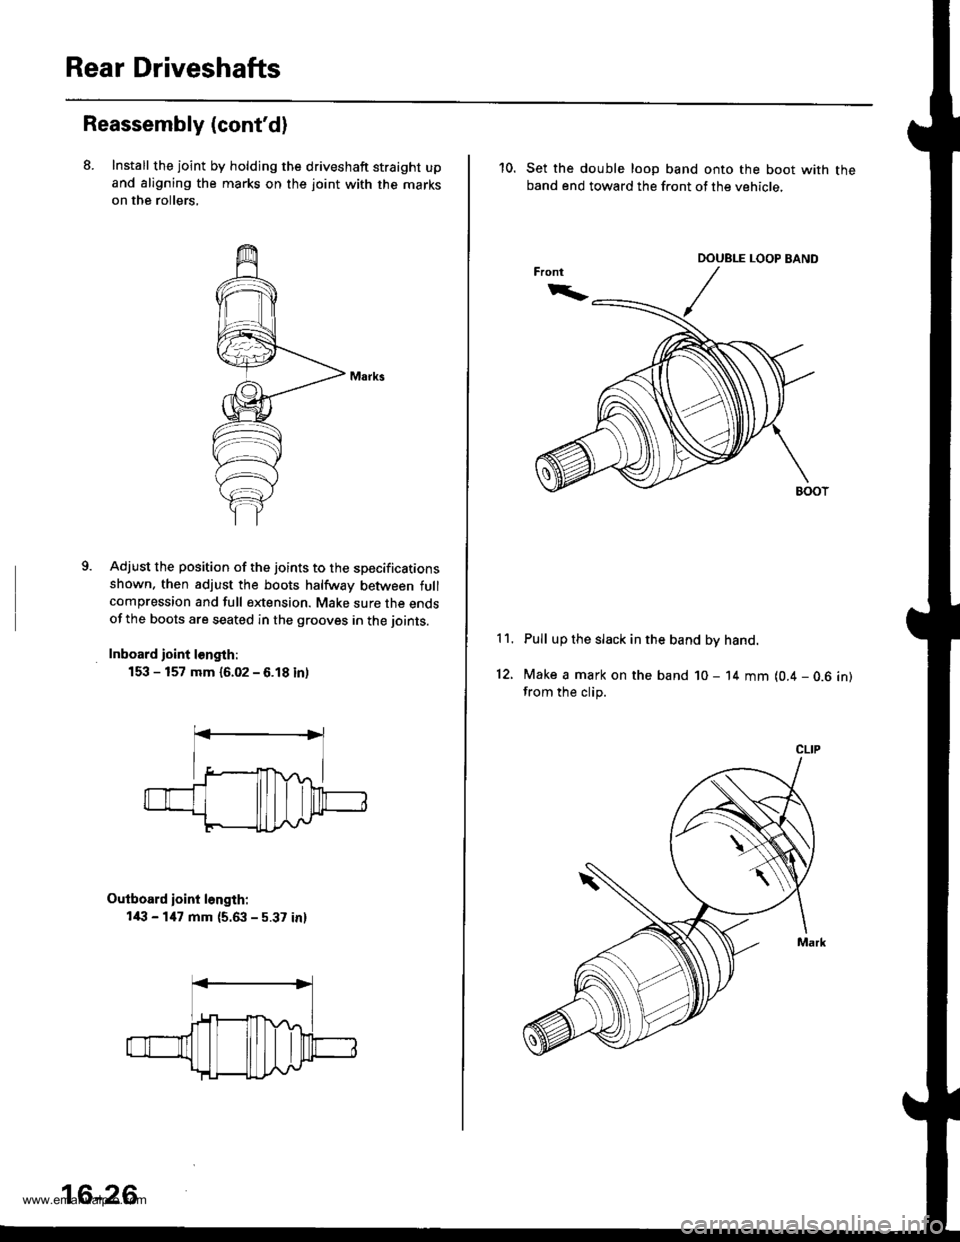 HONDA CR-V 1999 RD1-RD3 / 1.G Workshop Manual 
Rear Driveshafts
Reassembly (contd)
8. Install the joint by holdjng the driveshaft straight upand aligning the marks on the joint with the marks
on the rollers,
9.Adjust the position of the joints t